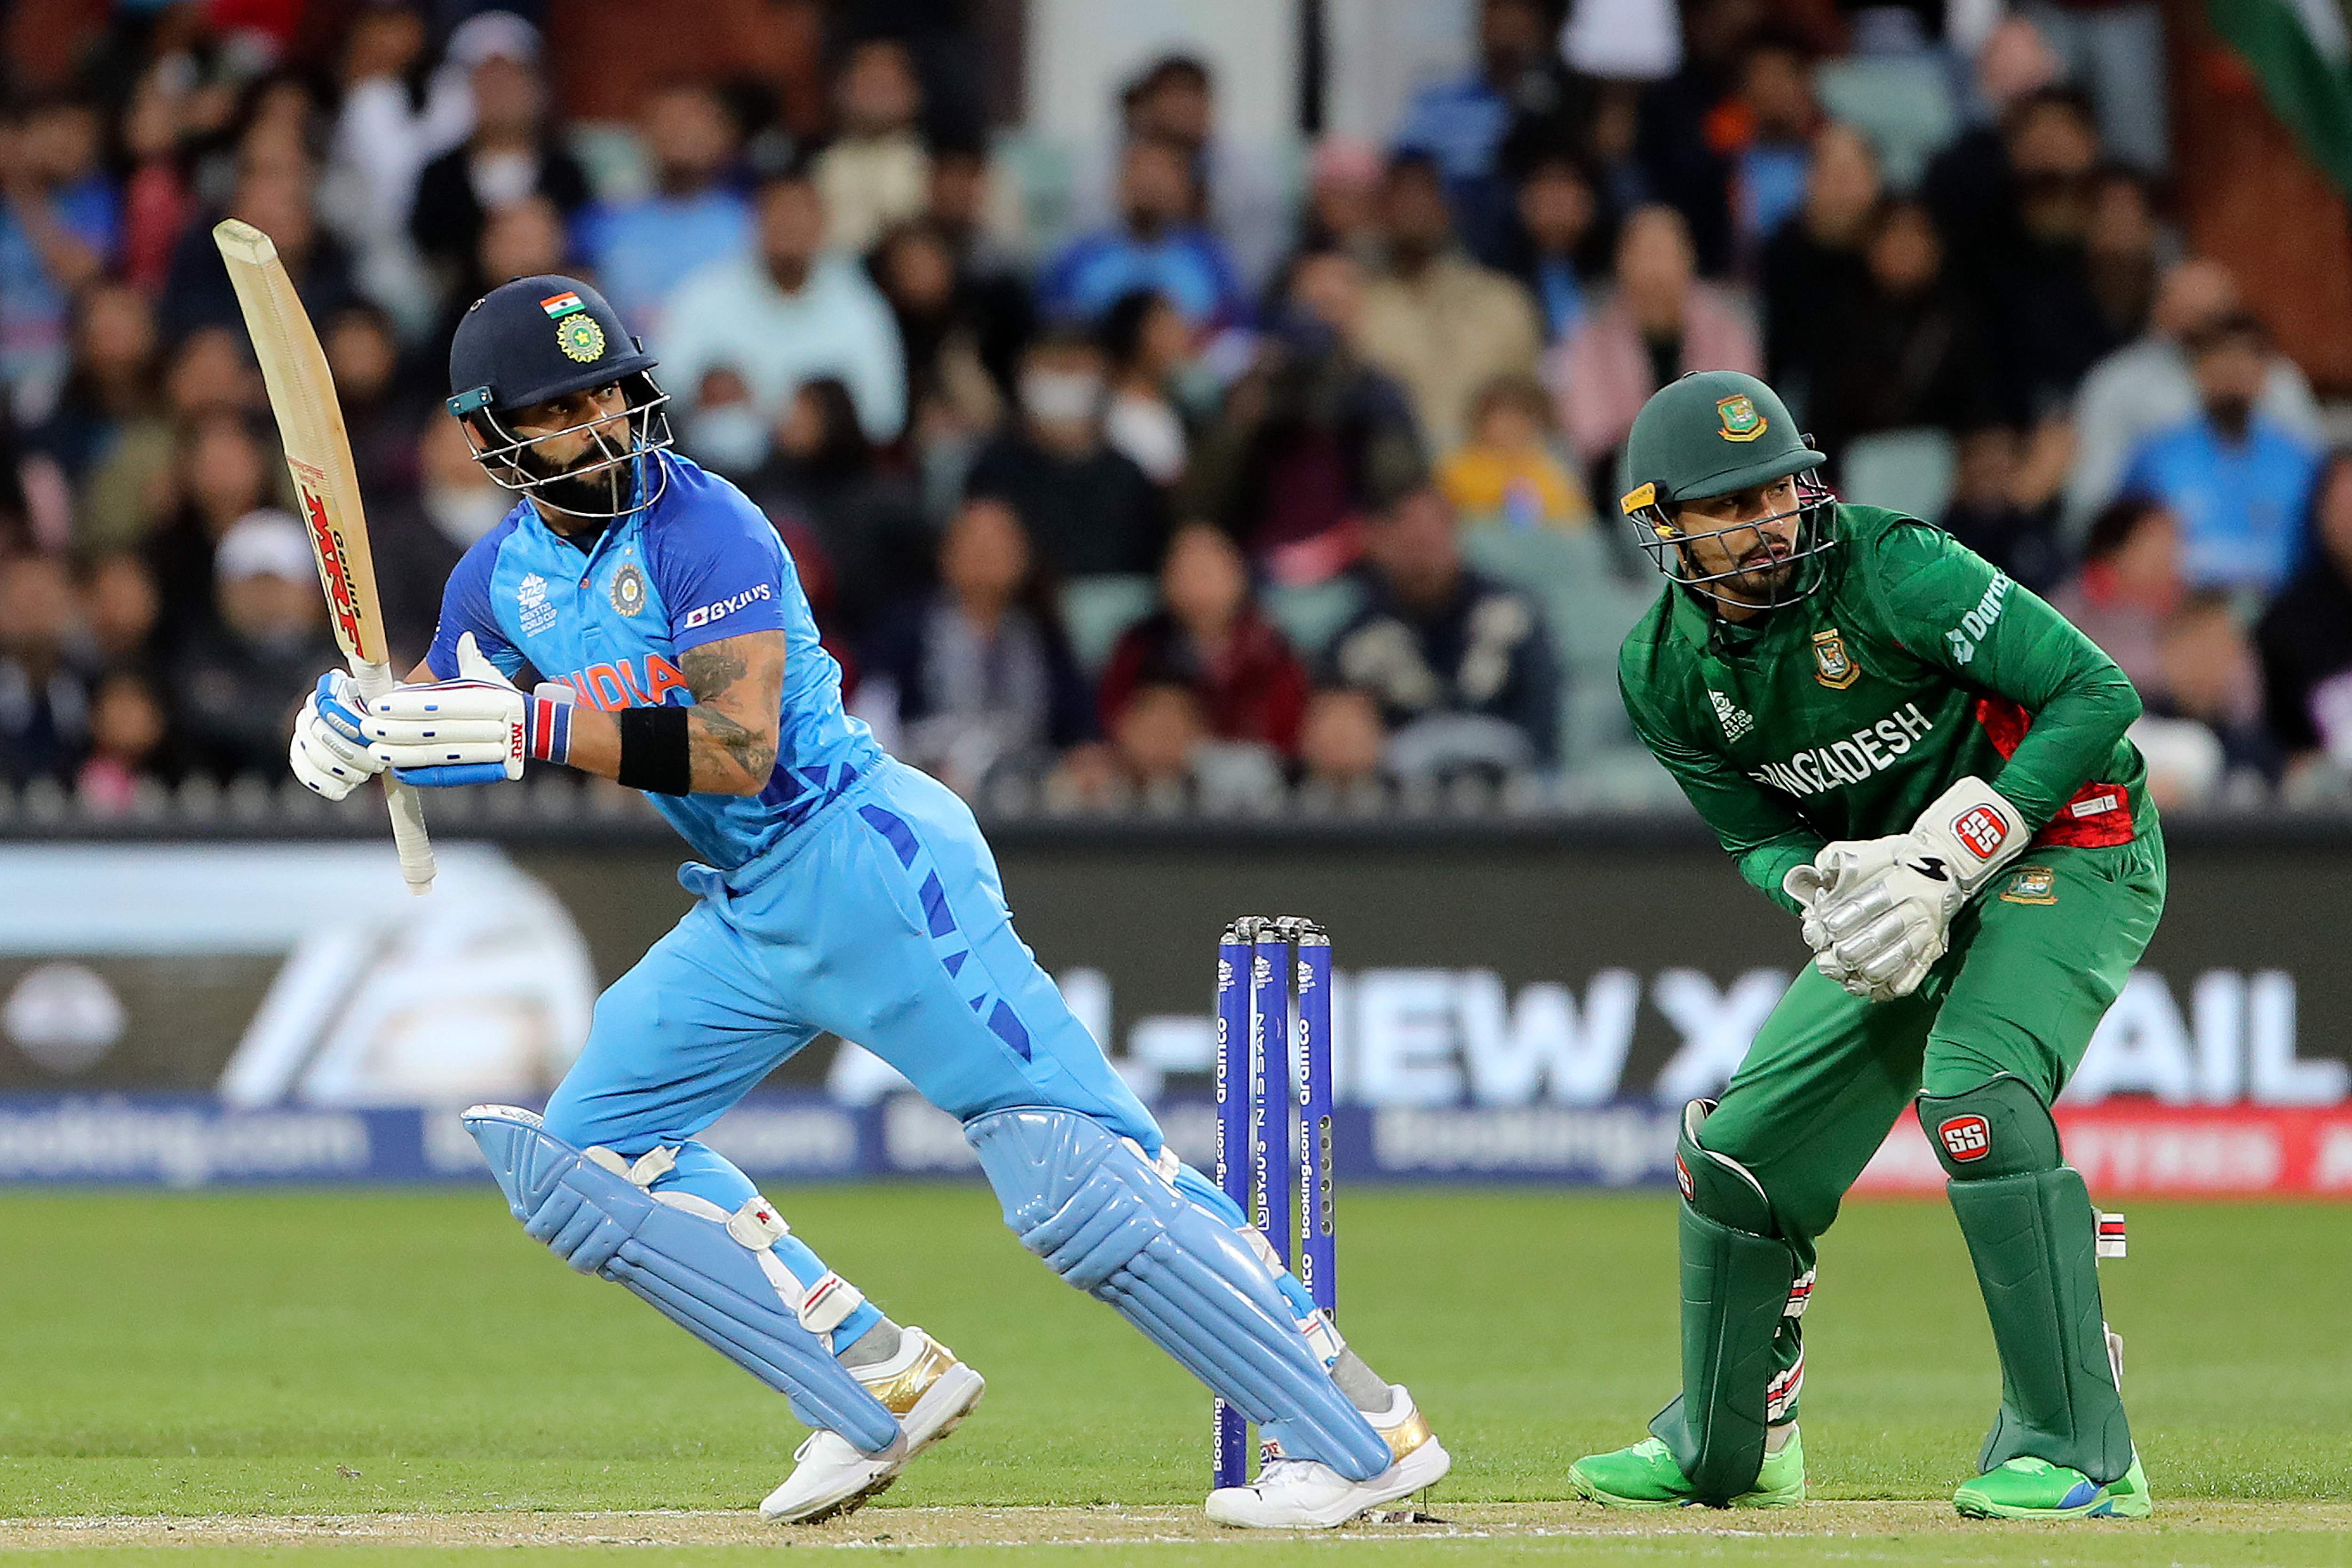 t20 world cup, india cricket, england cricket, west indies, australia cricket, virat kohli, rashid khan, jofra archer, mitchell marsh, cricket’s t20 world cup uses a fast and furious format which appeals to fans old and new